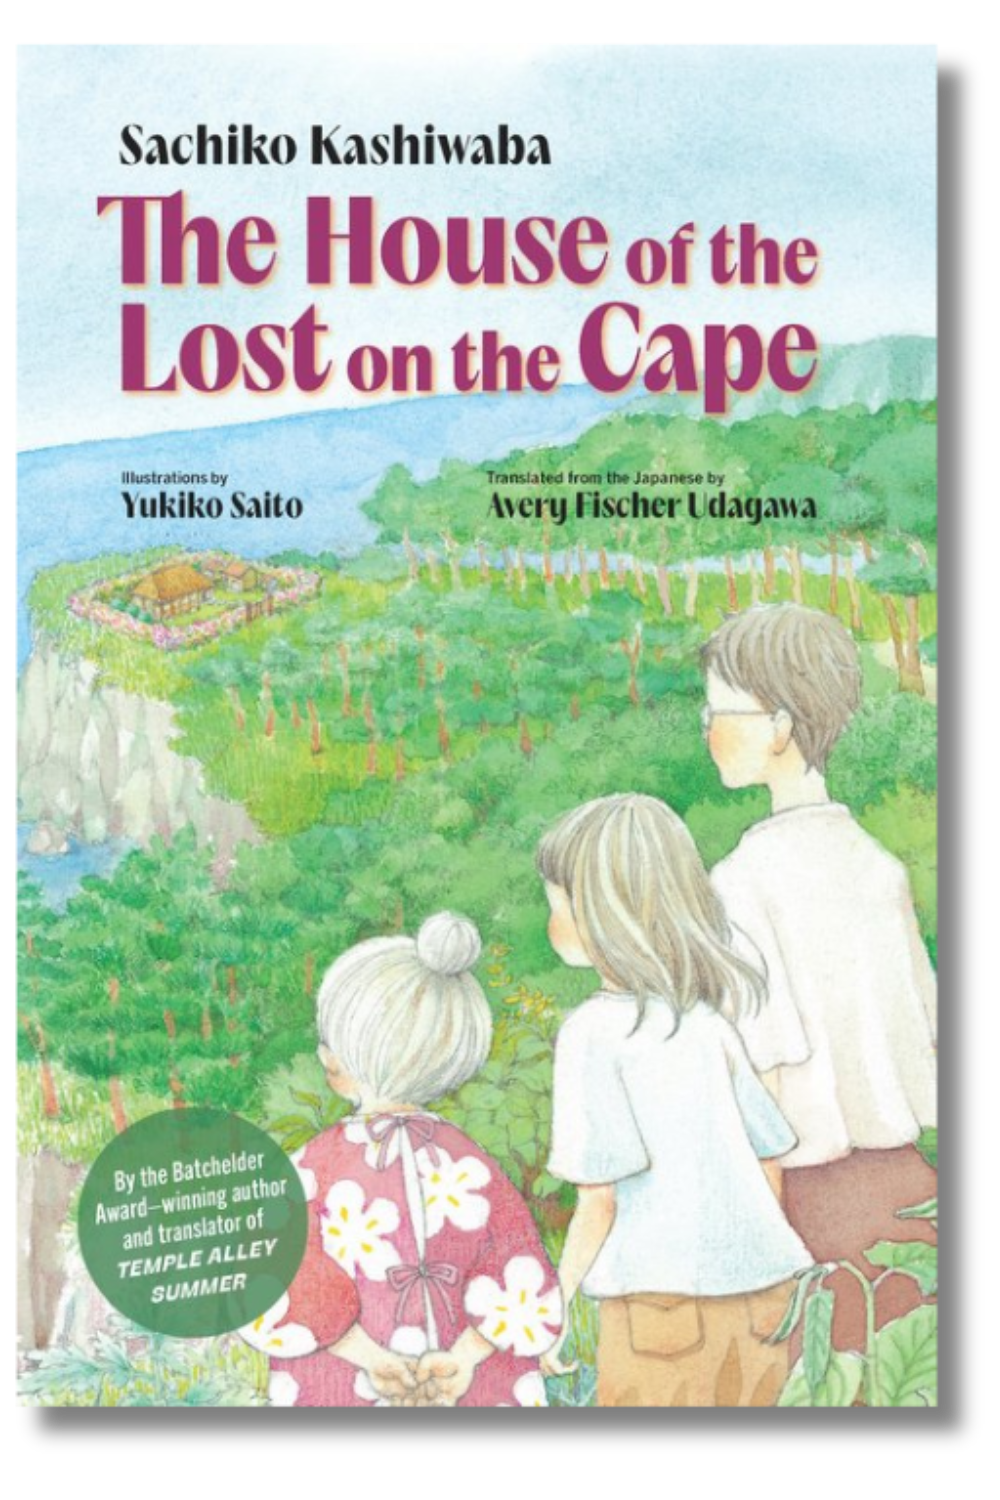 The cover of "The House of the Lost on the Cape" by Sachiko Kashiwaba